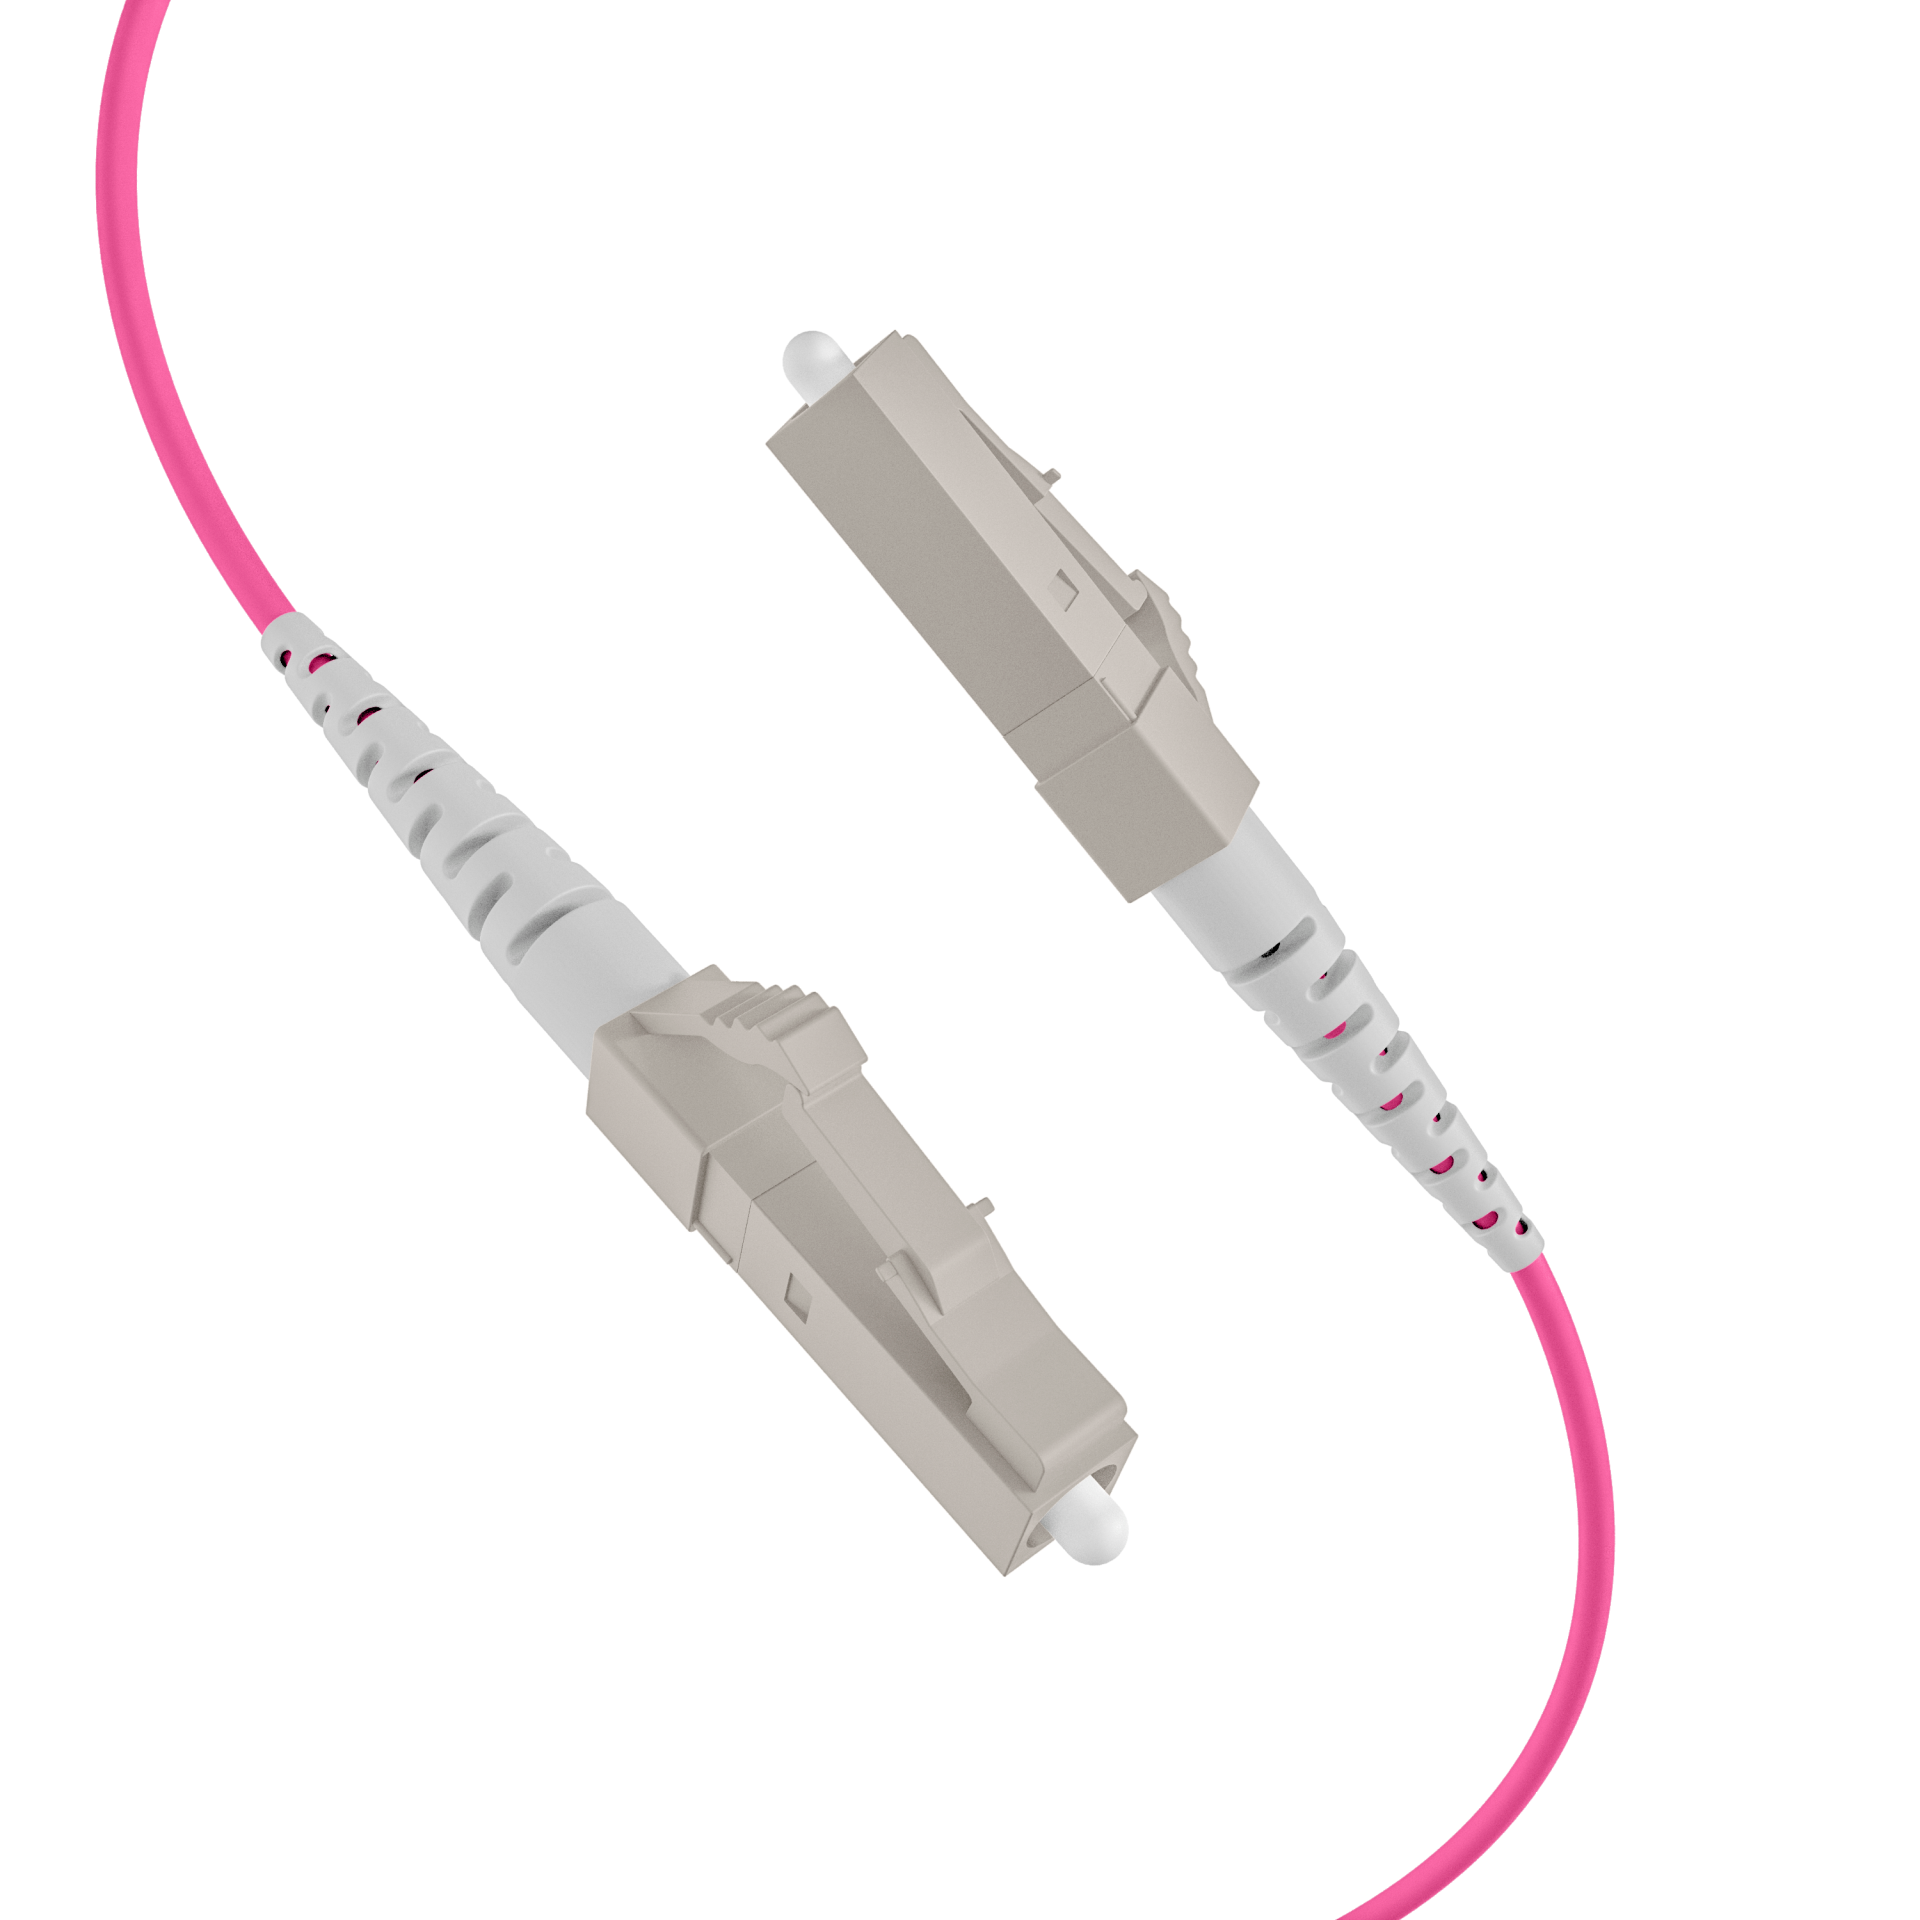 Trunkcable U-DQ(ZN)BH OM4 12G (1x12) LC-LC,140m Dca LSZH